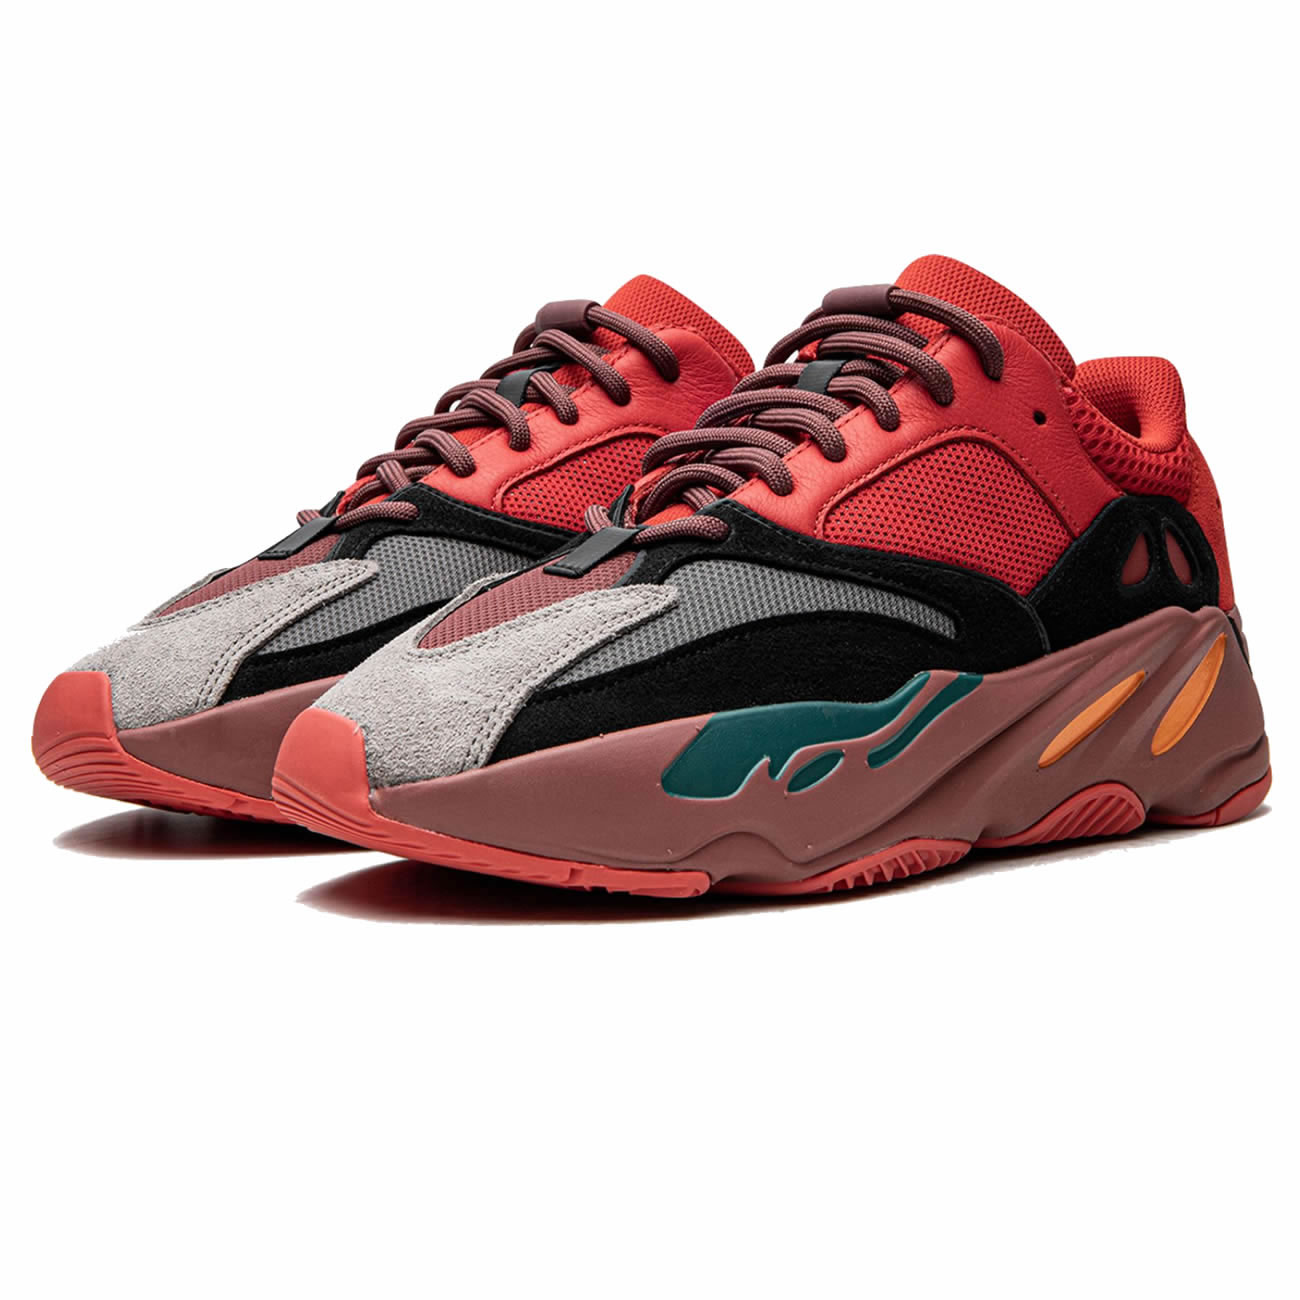 Adidas Yeezy Boost 700 Hi Res Red Hq6979 (4) - newkick.org